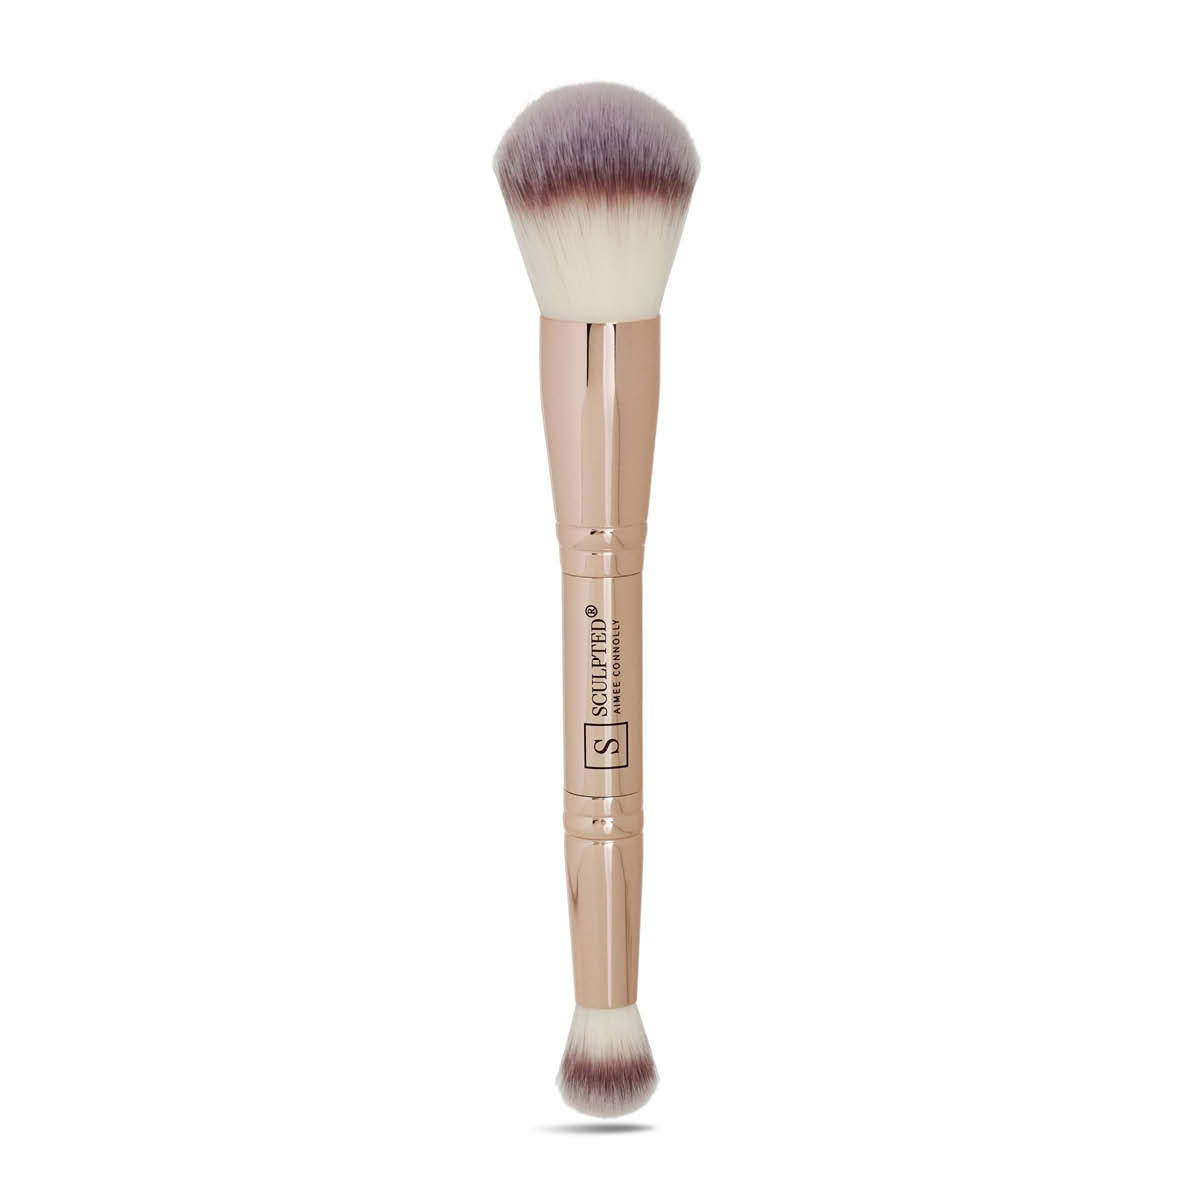 Sculpted By Aimee Connolly Beauty Buffer Complexion Brush